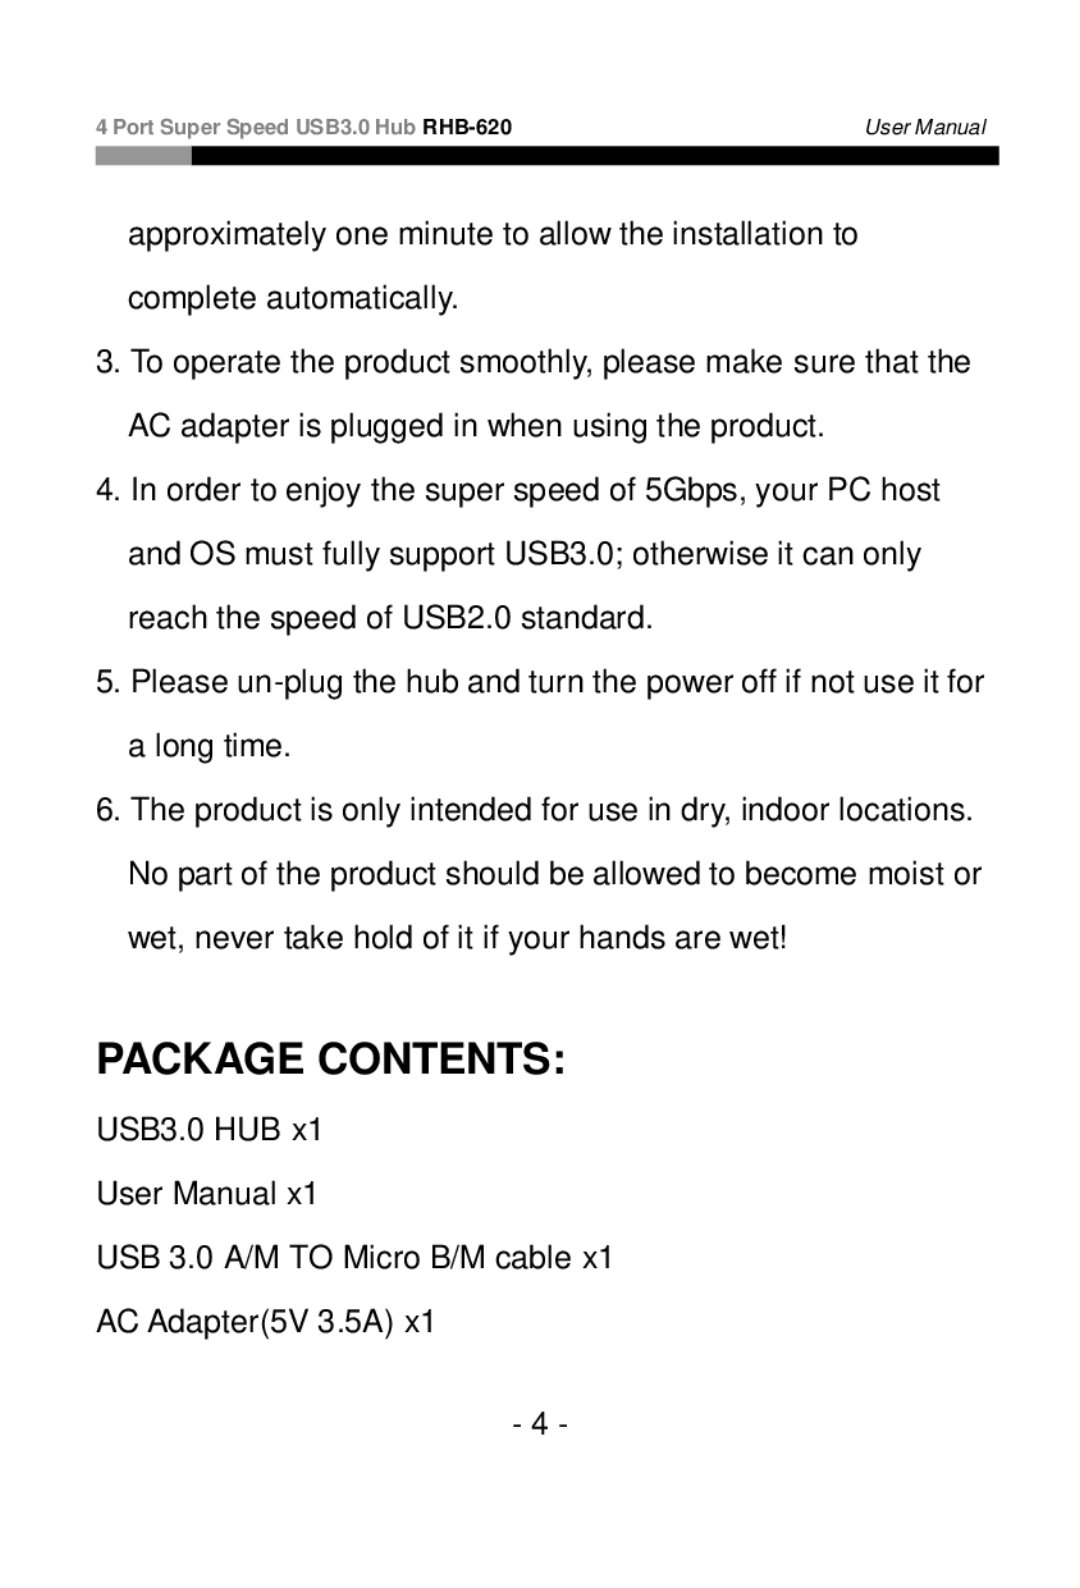 Rosewill RHB-620 user manual Package Contents 